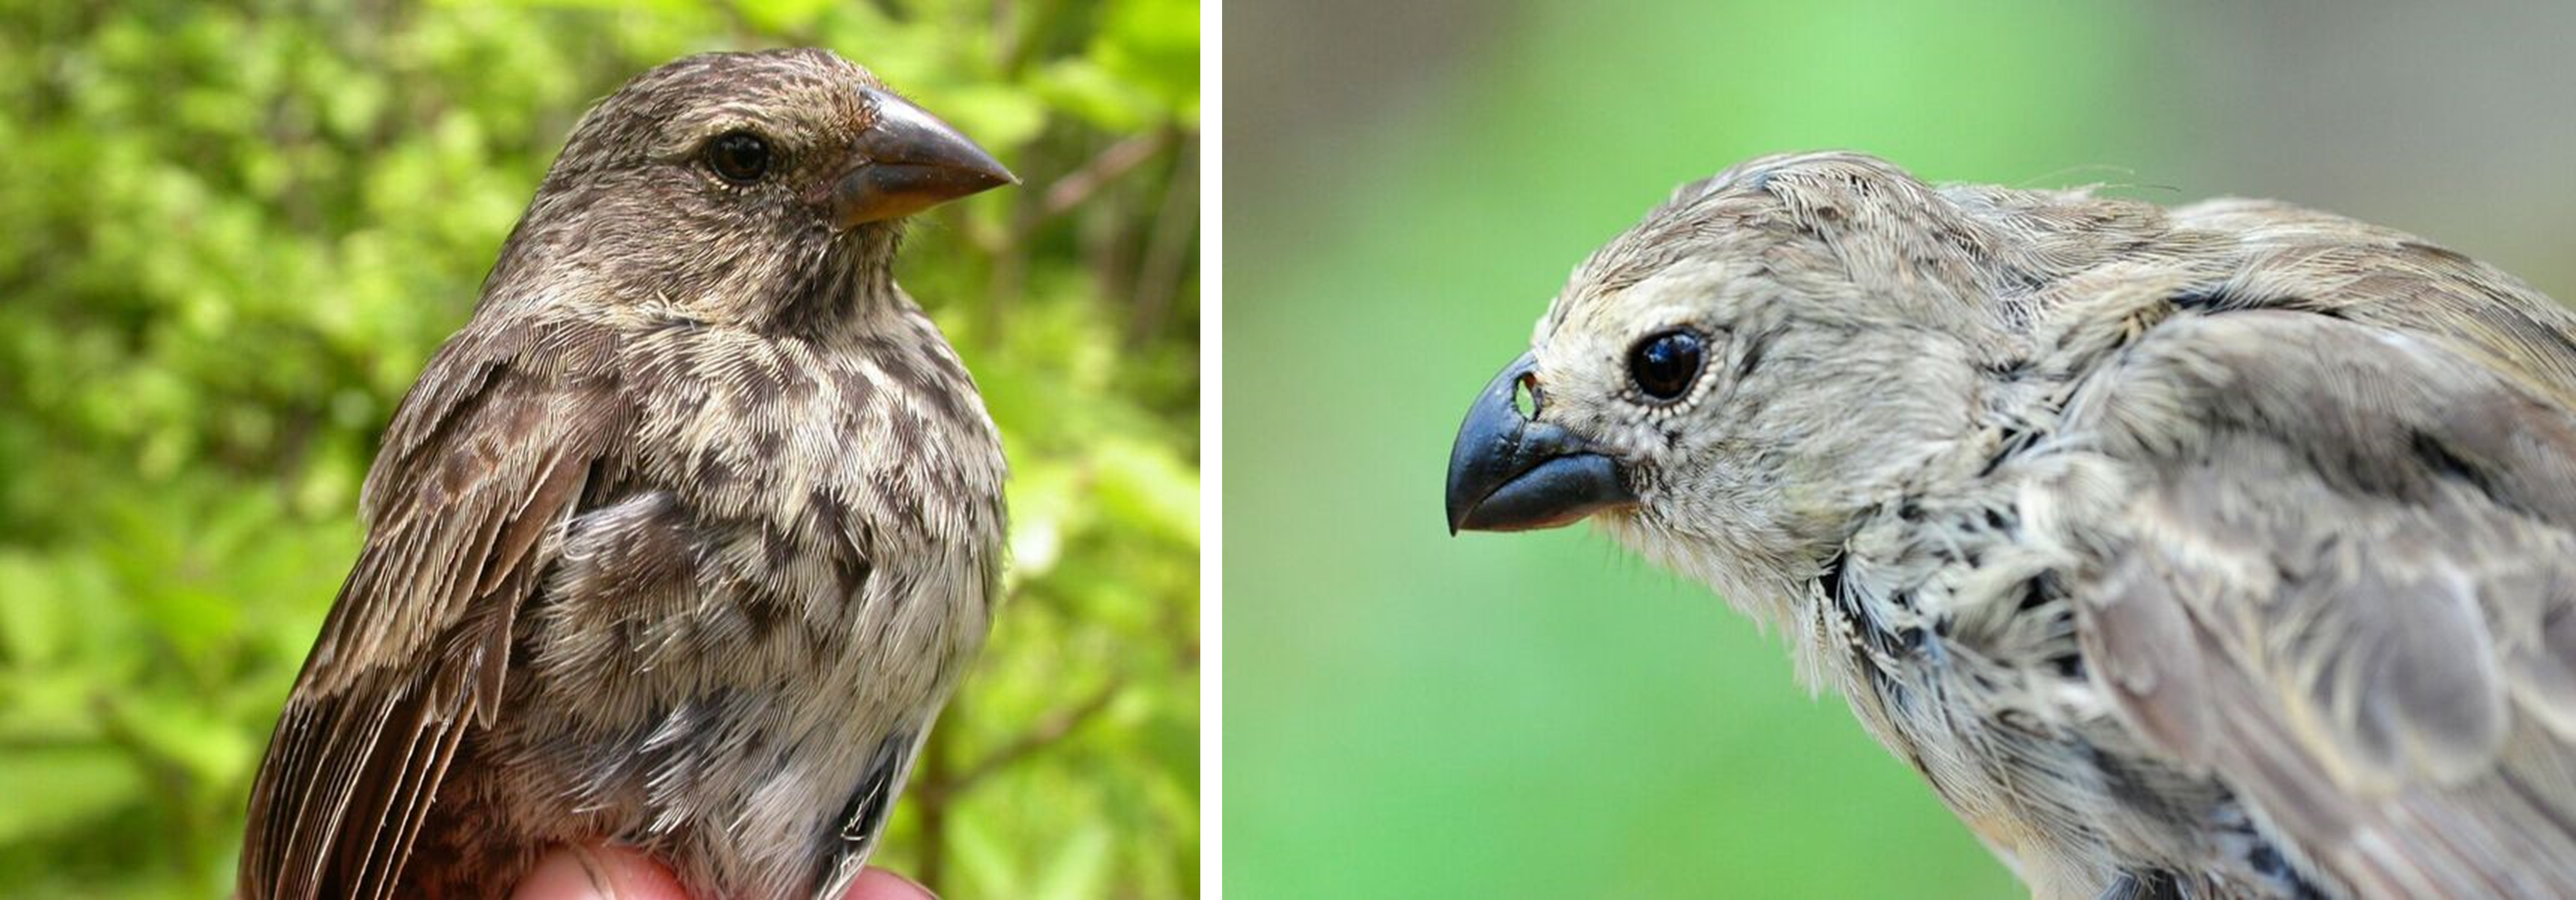 Comparative images show the beaks of a normal adult finch (right) and a survivor of P. Downsi infestation (left). Note the enlarged nostrils of the survivor. Photos by S. Kleindorfer and K.J. Peters.